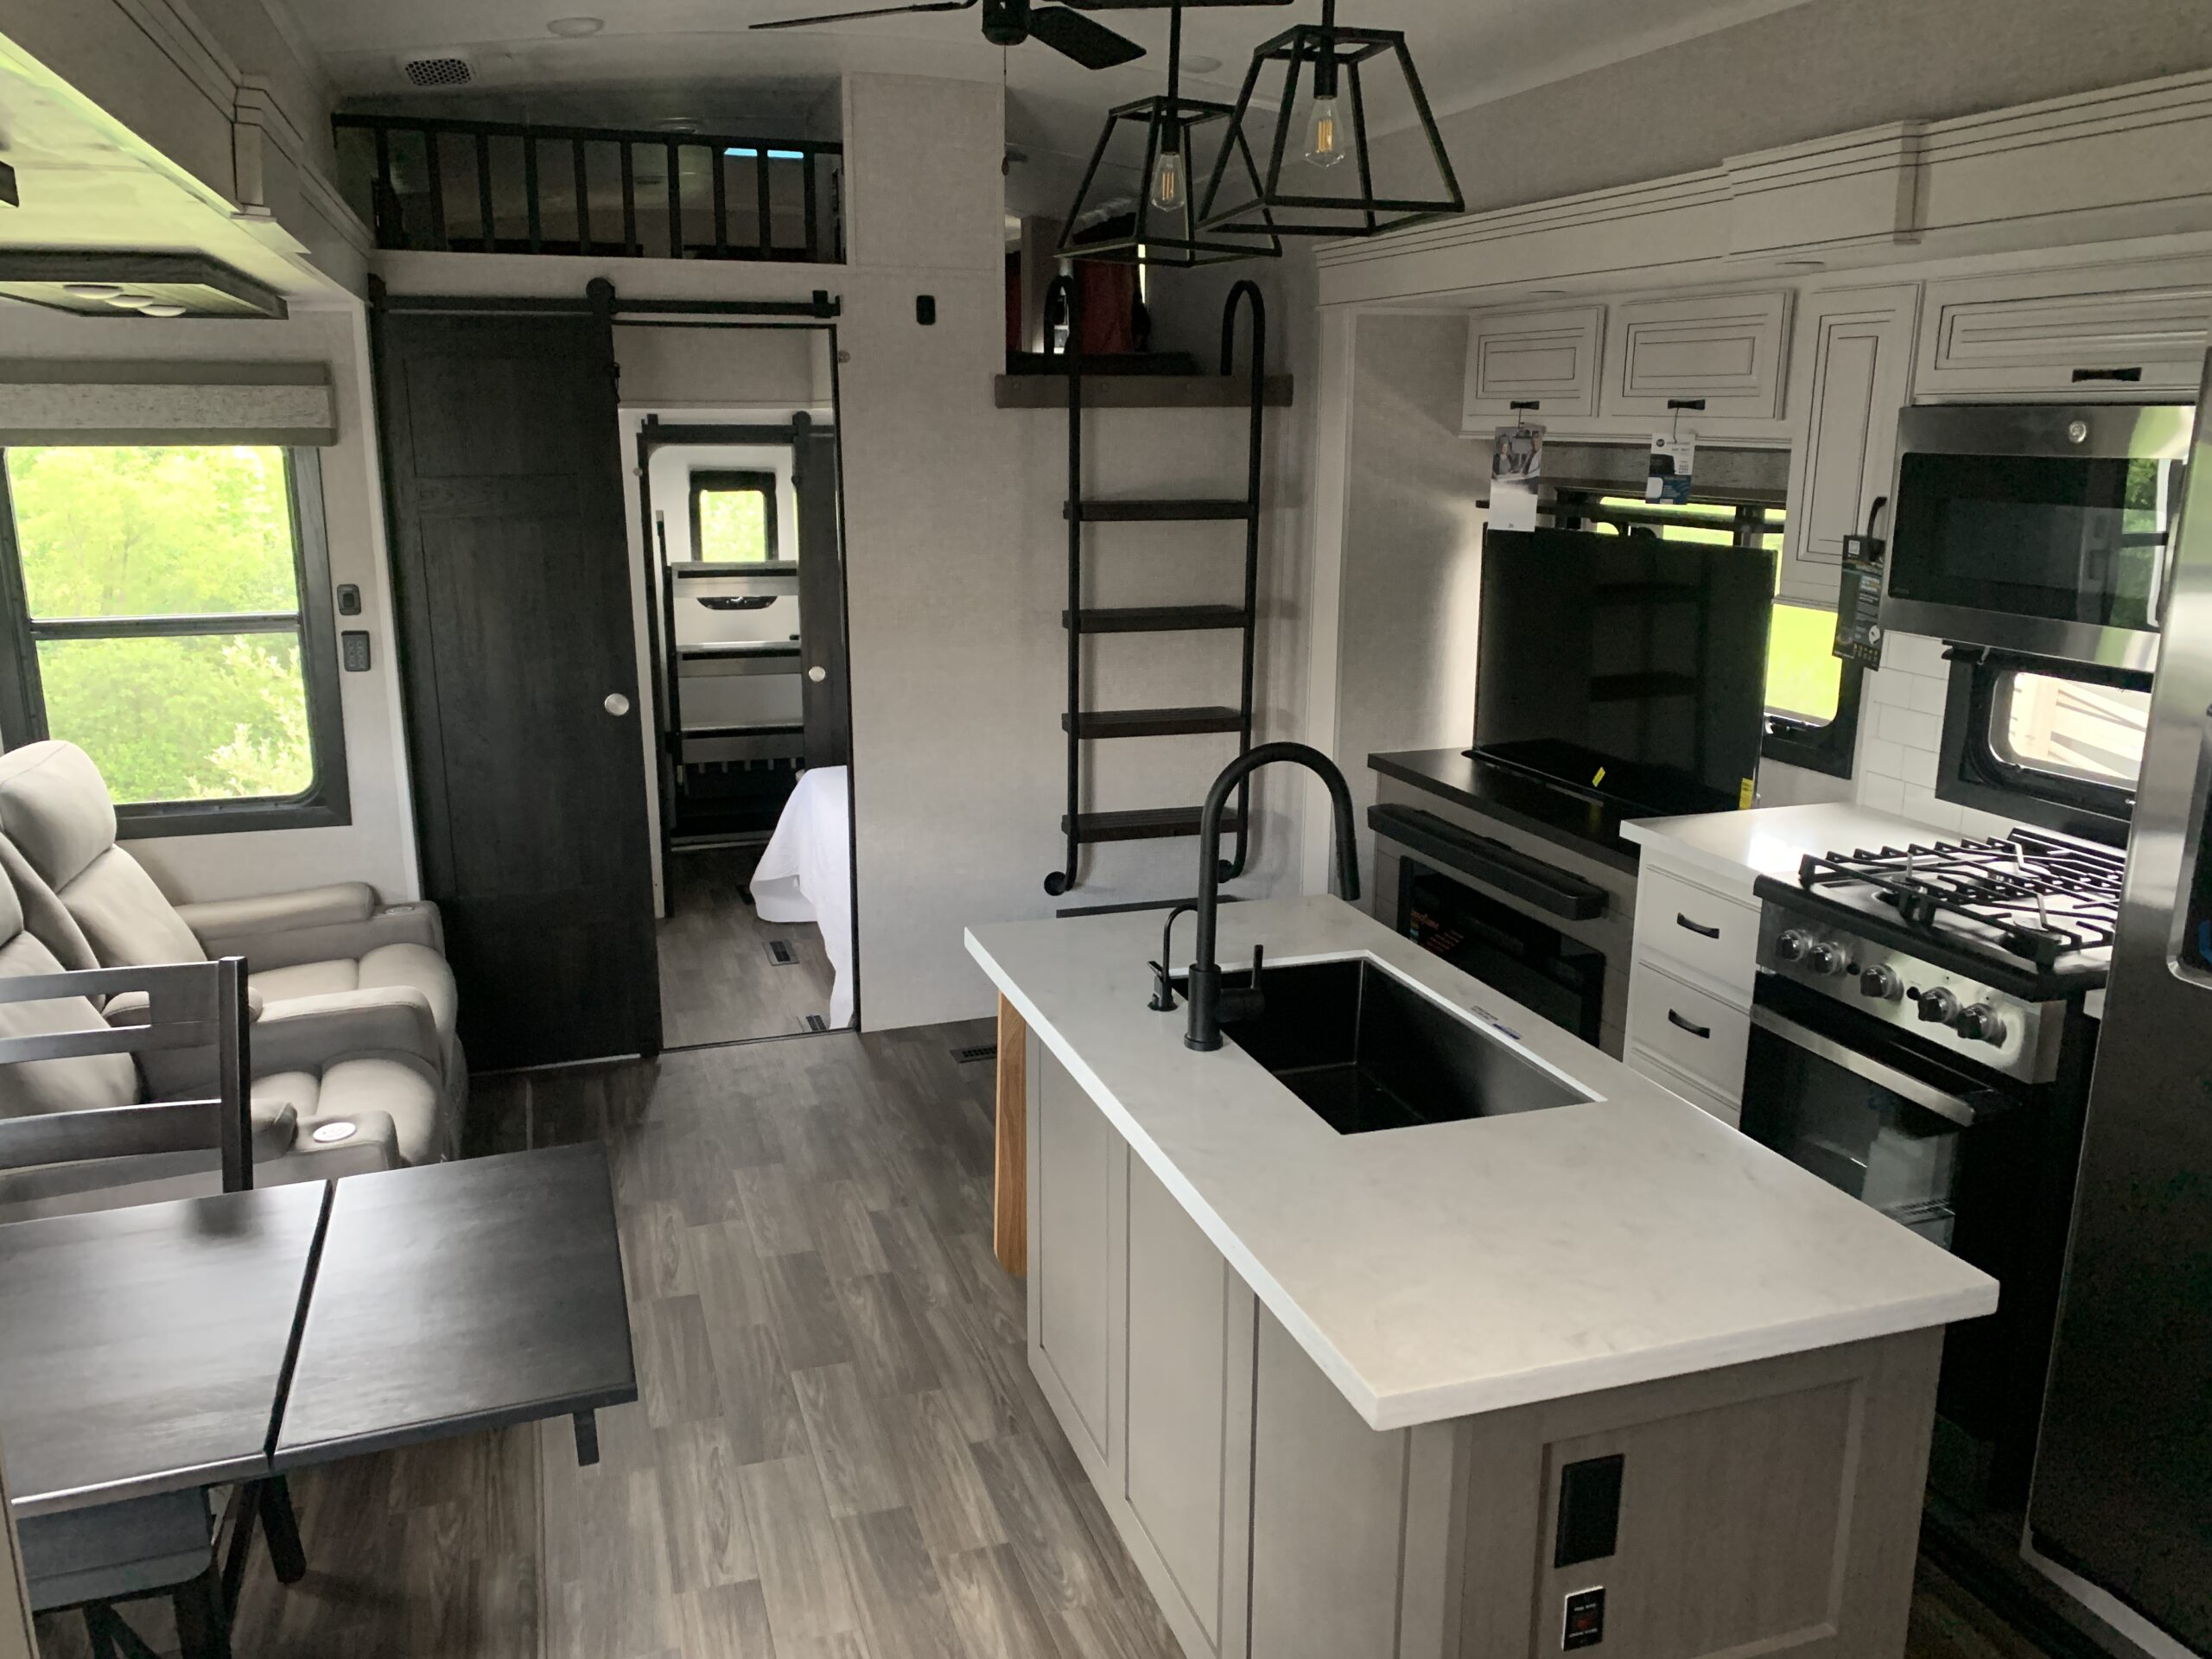 2024 JAYCO NORTH POINT 390CKDS